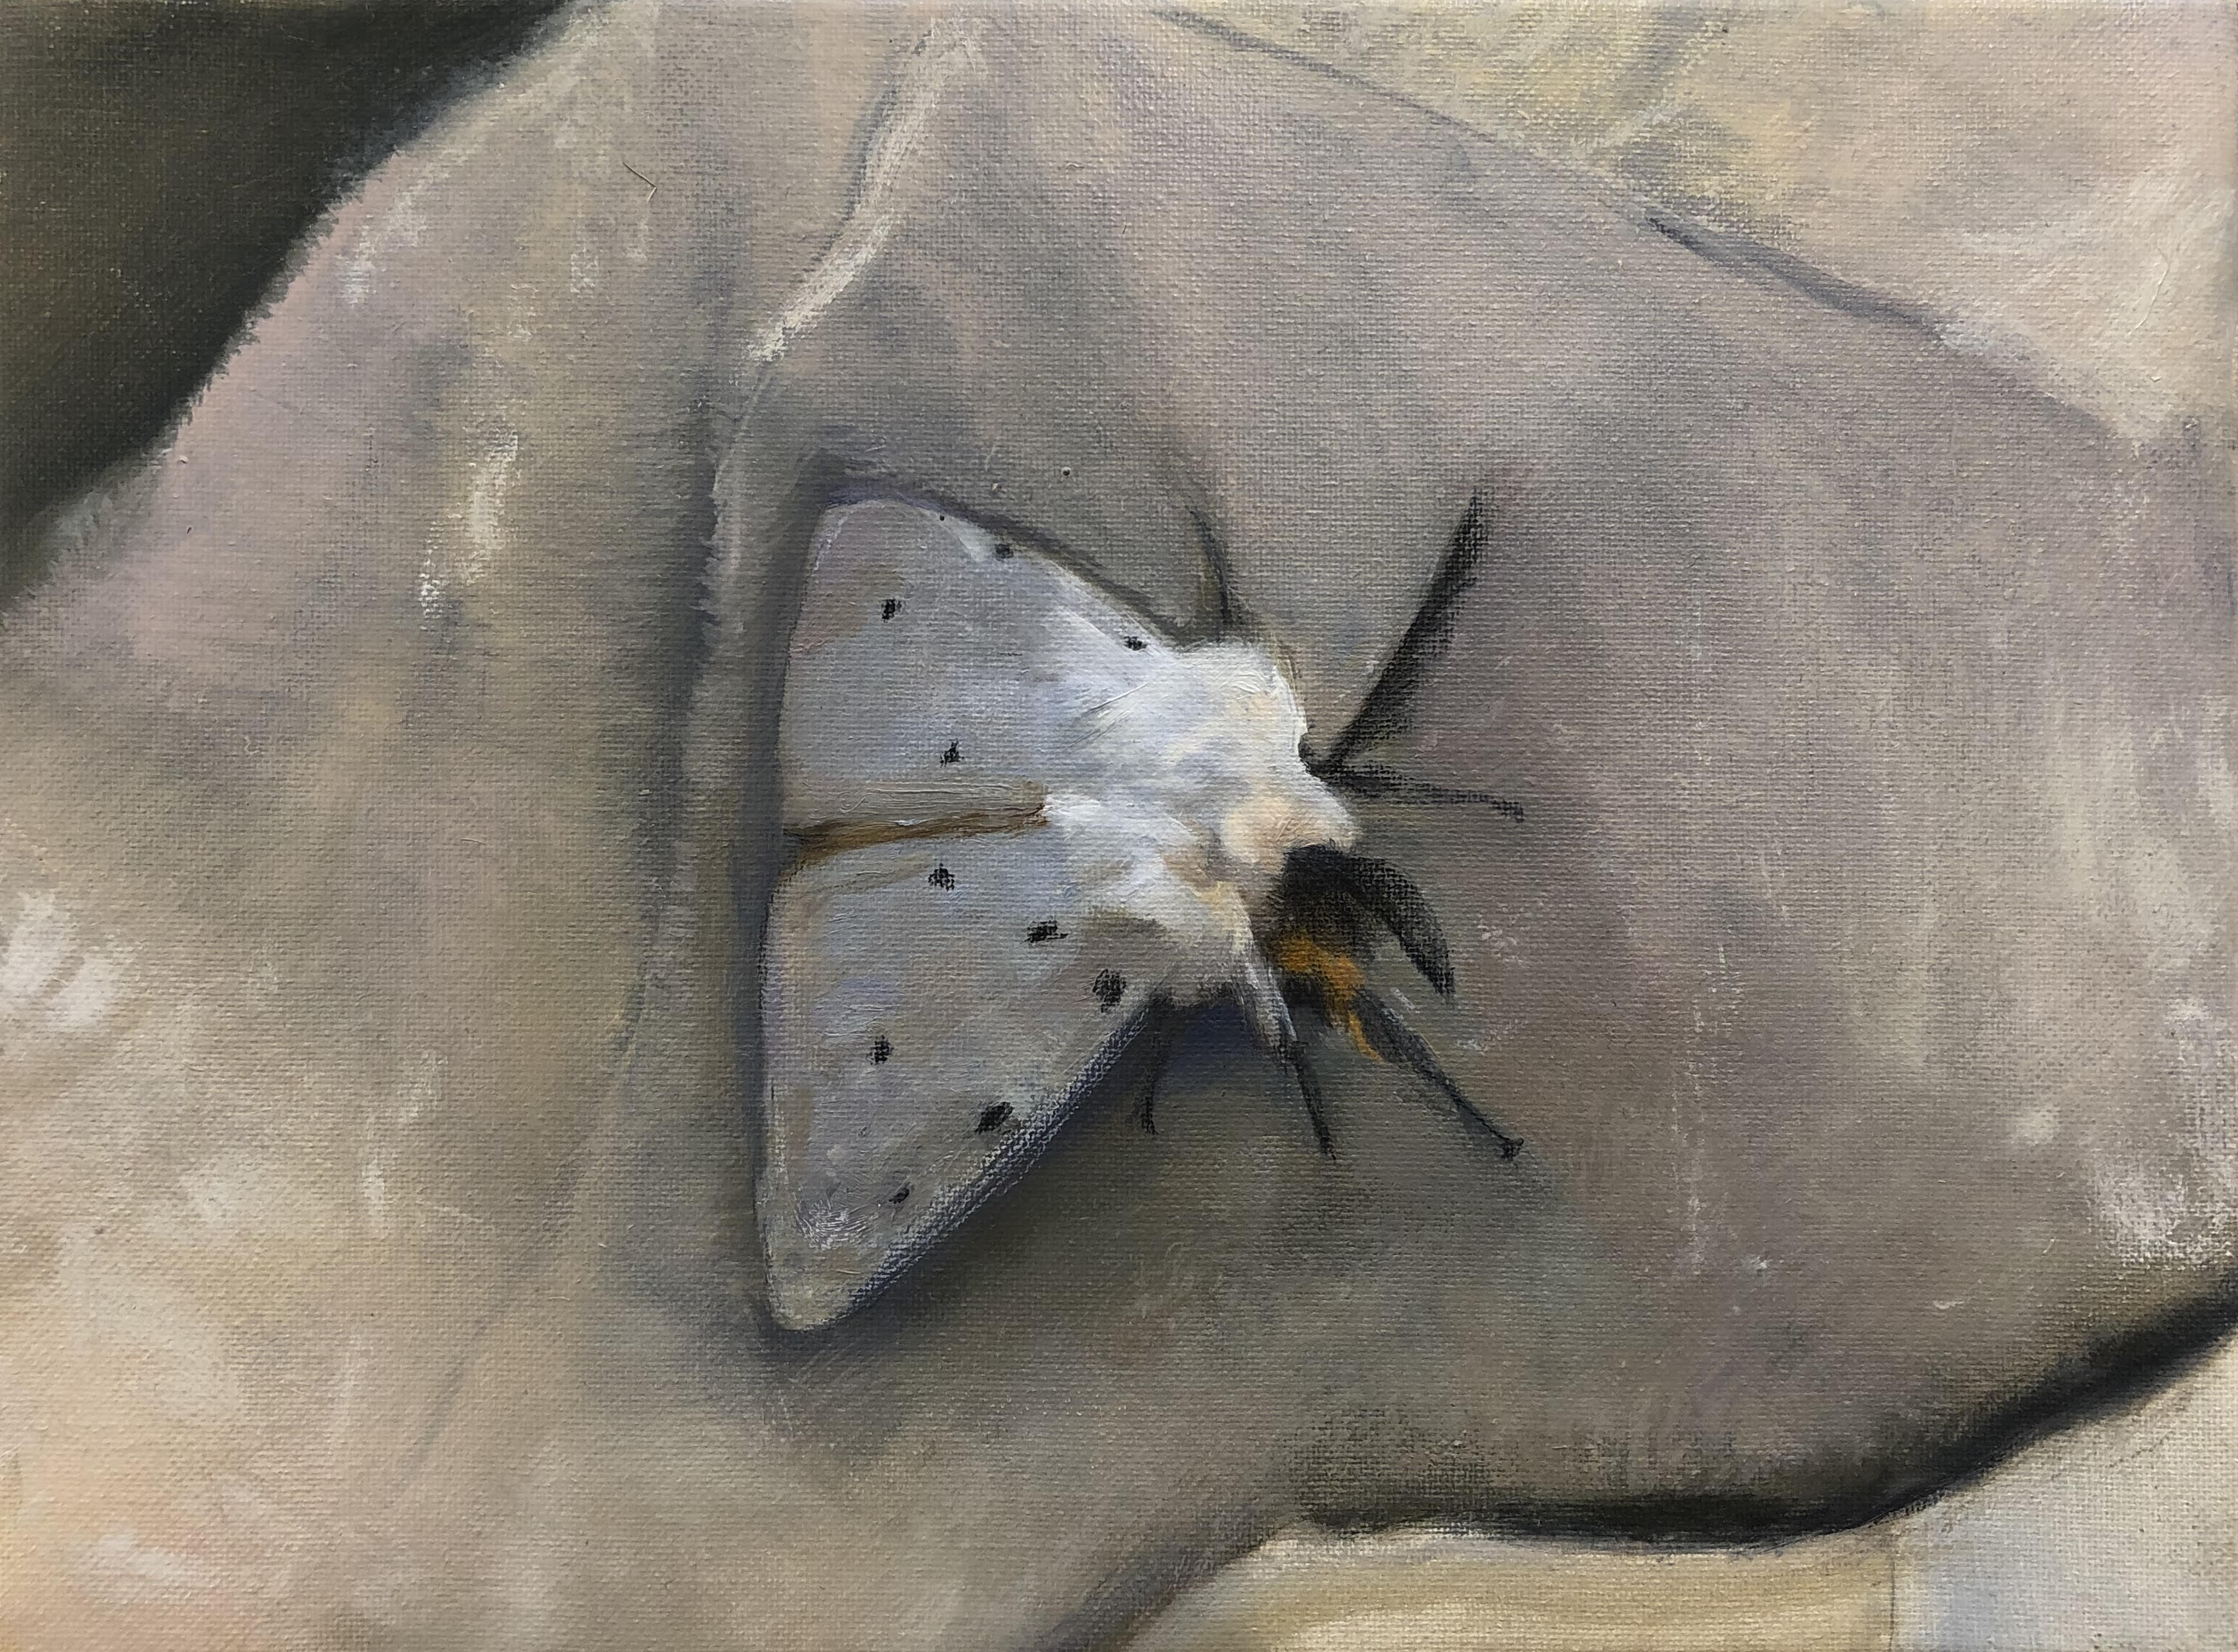 Muslin Moth by Beatrice O'Connell